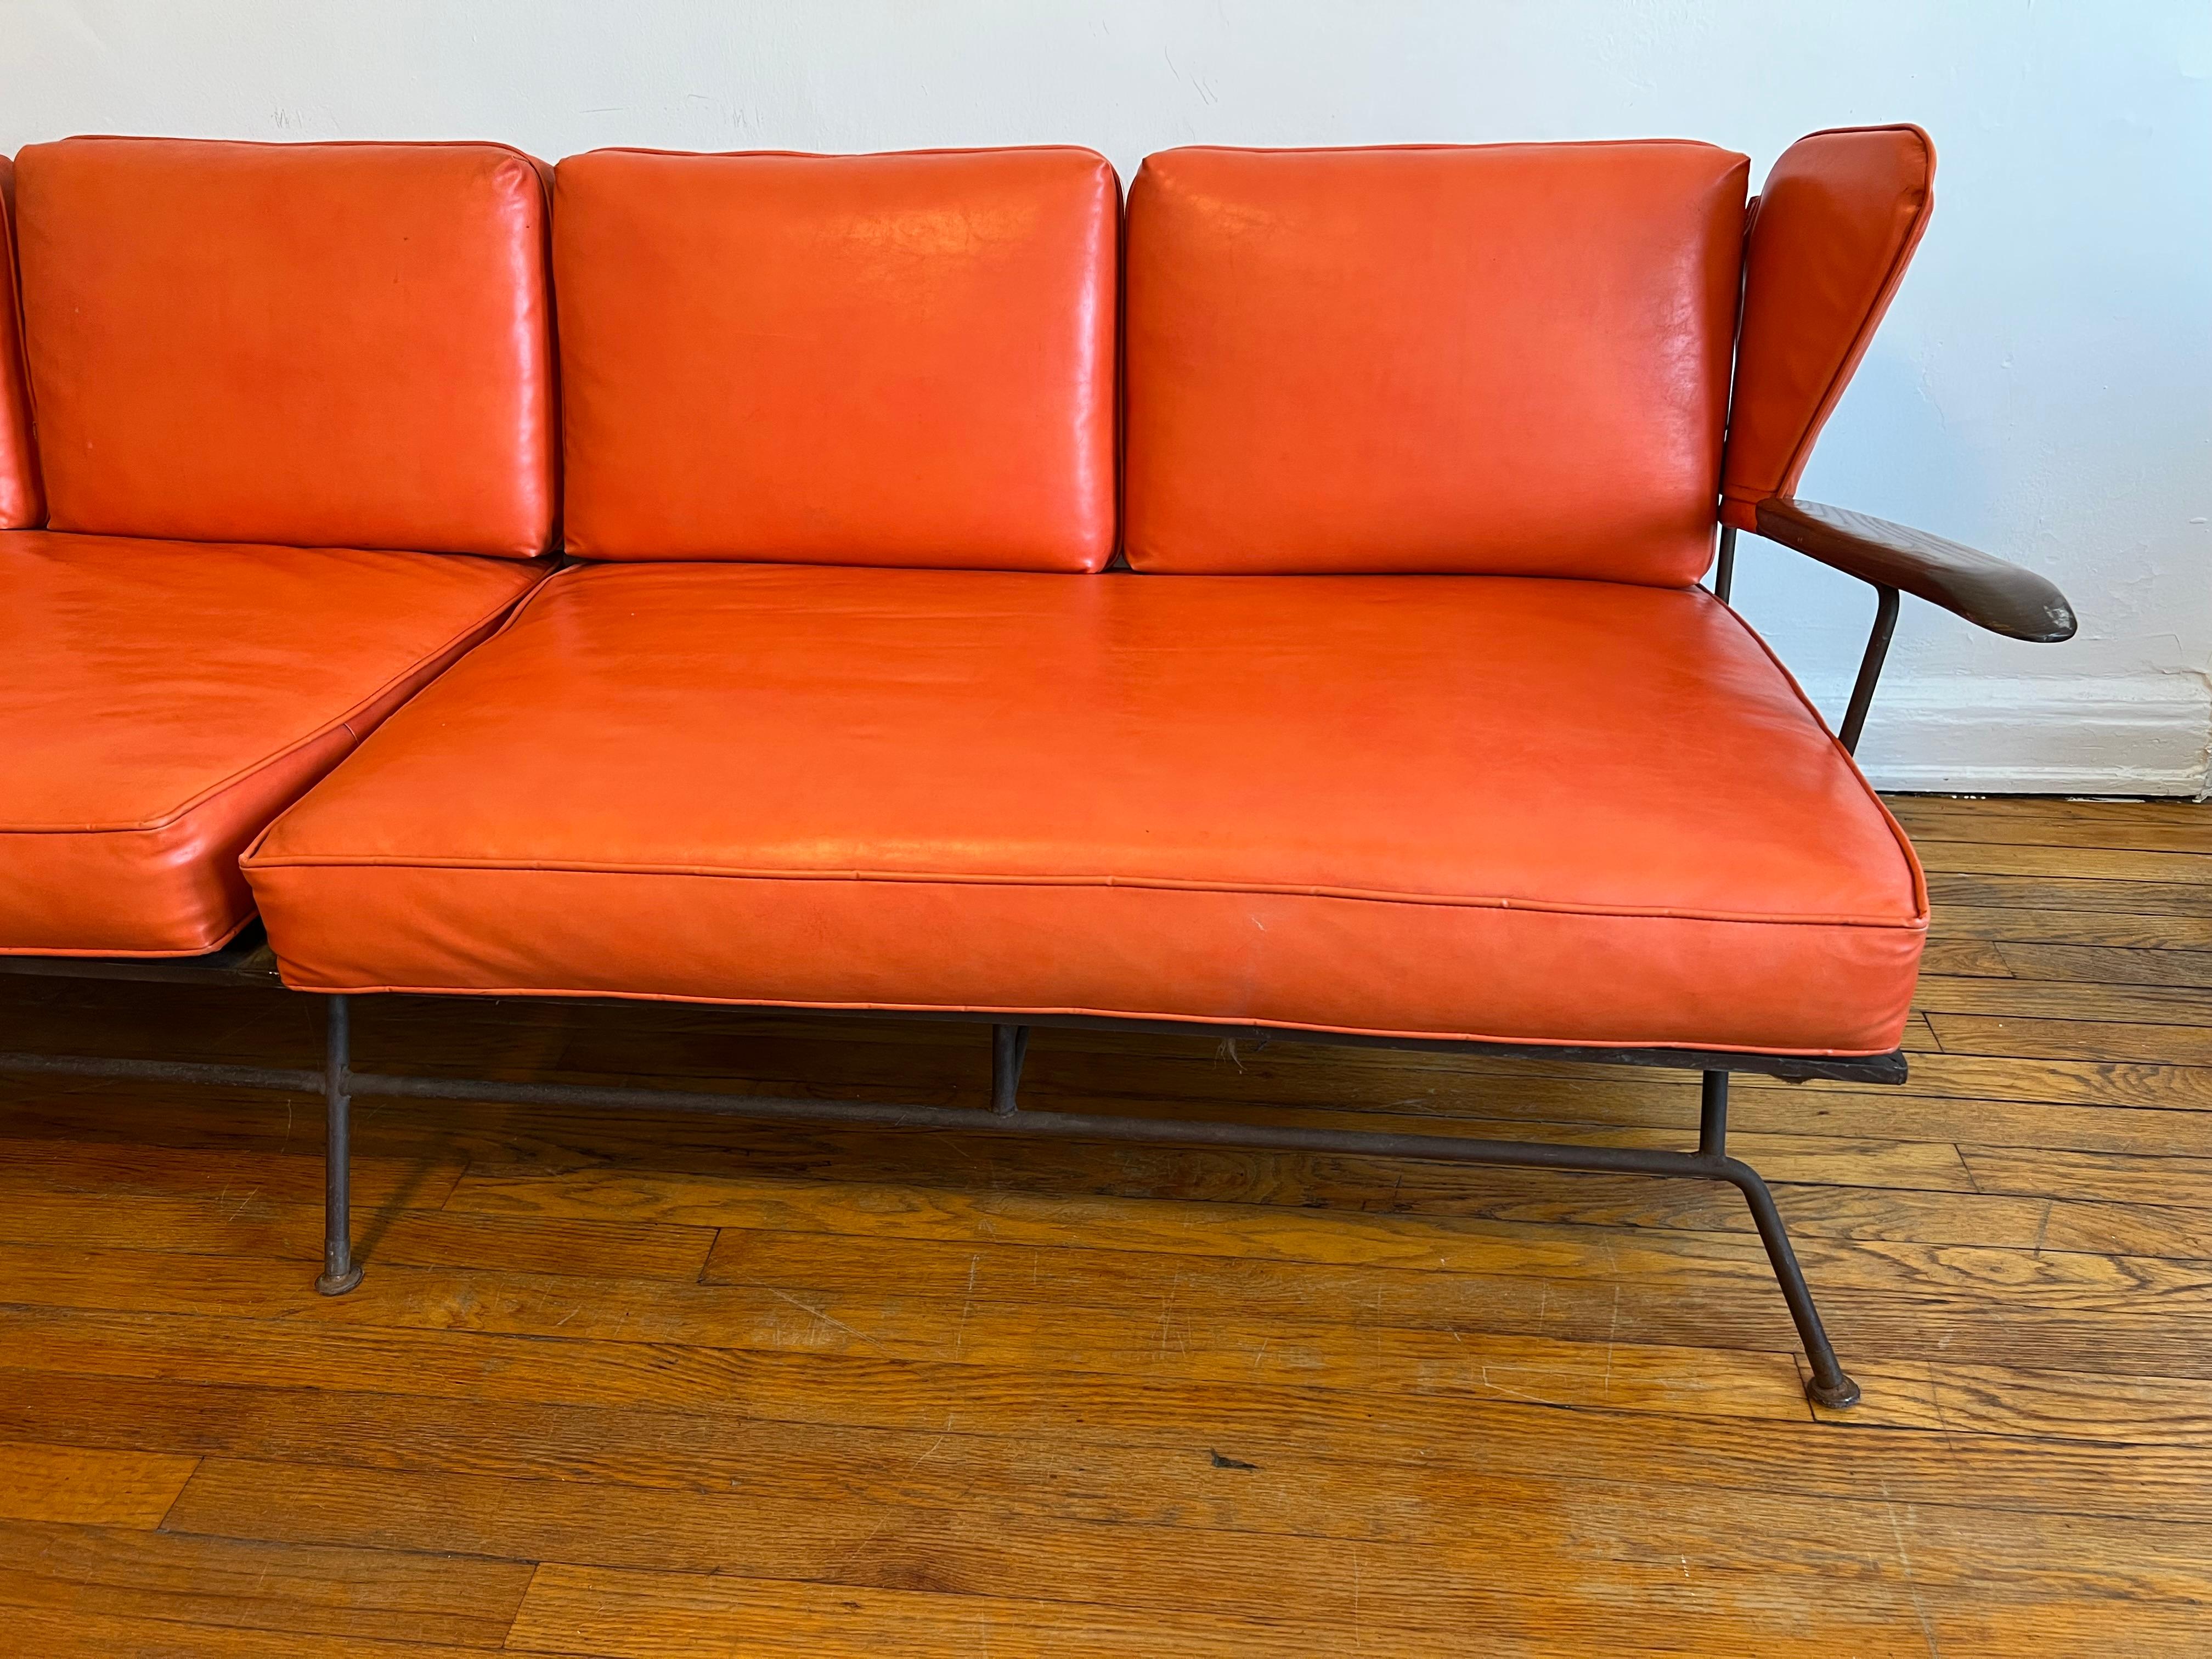 Very Rare sofa by North Carolina Blacksmith and furniture designer and maker Max Stout.

Sofa is in complete original condition with original cushions (foam) and the original Orange naugahyde fabric. There is one small cut/nick to the wing back